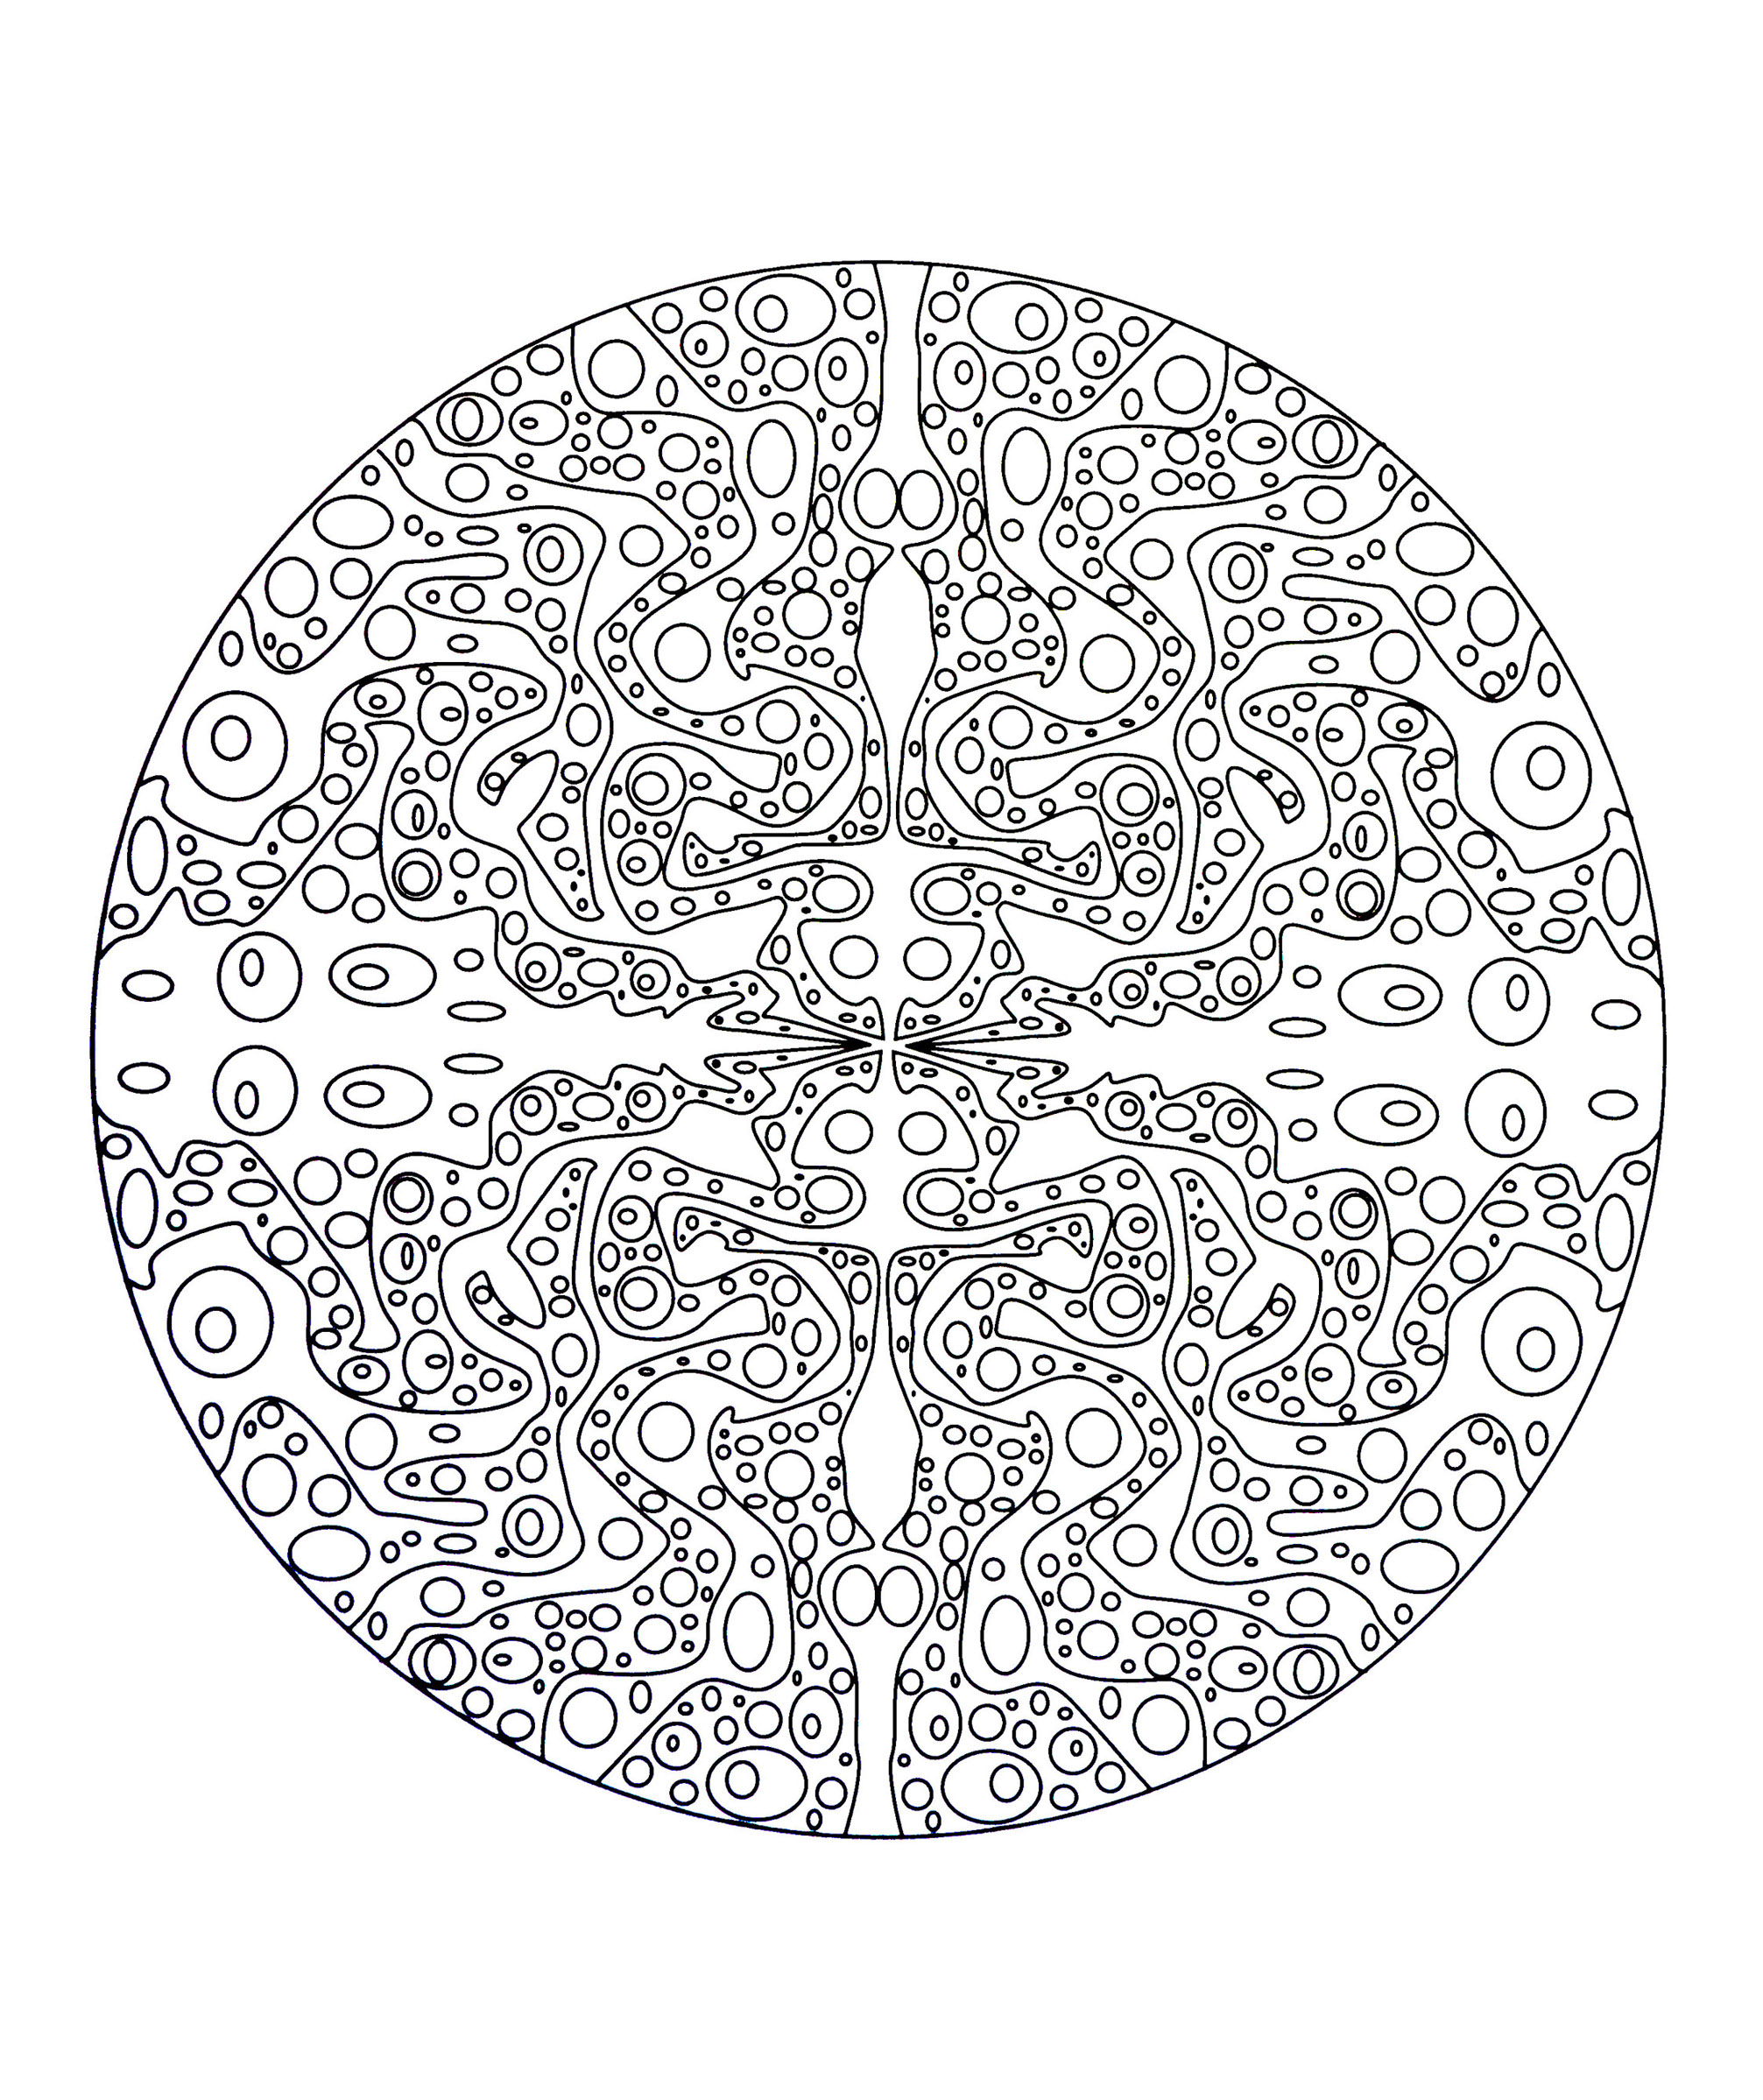 Mandala to color difficult - 30